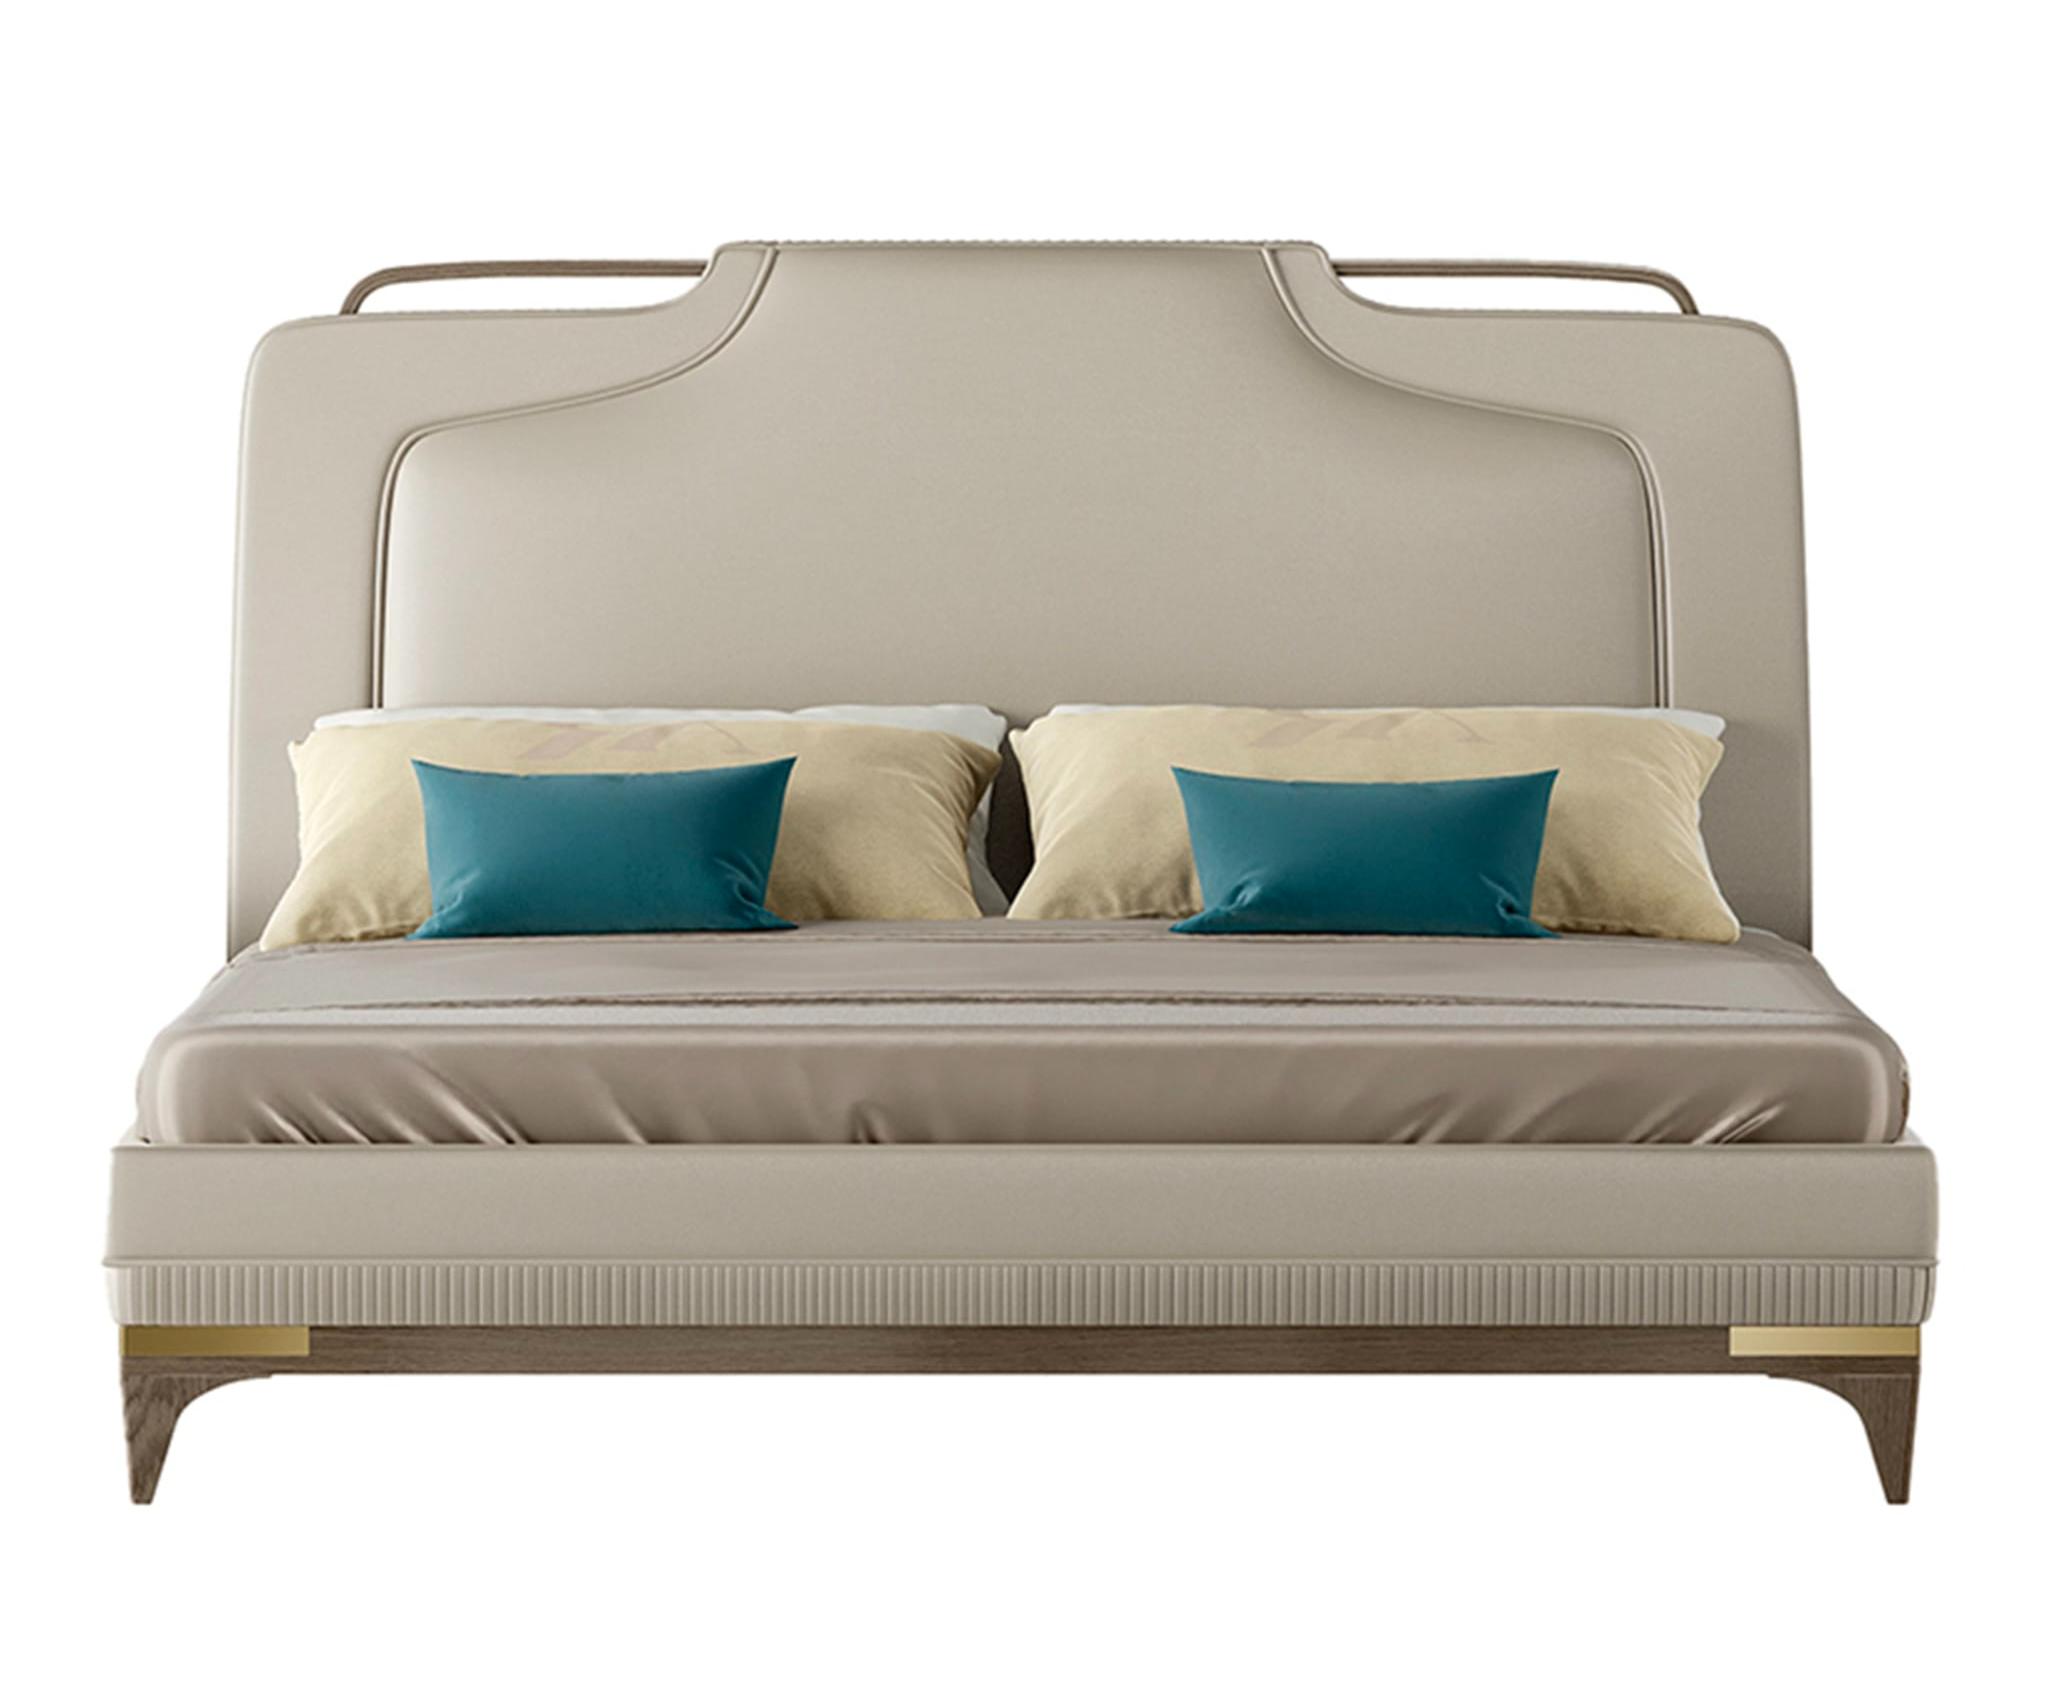 Artisanal Beige Leather Bed